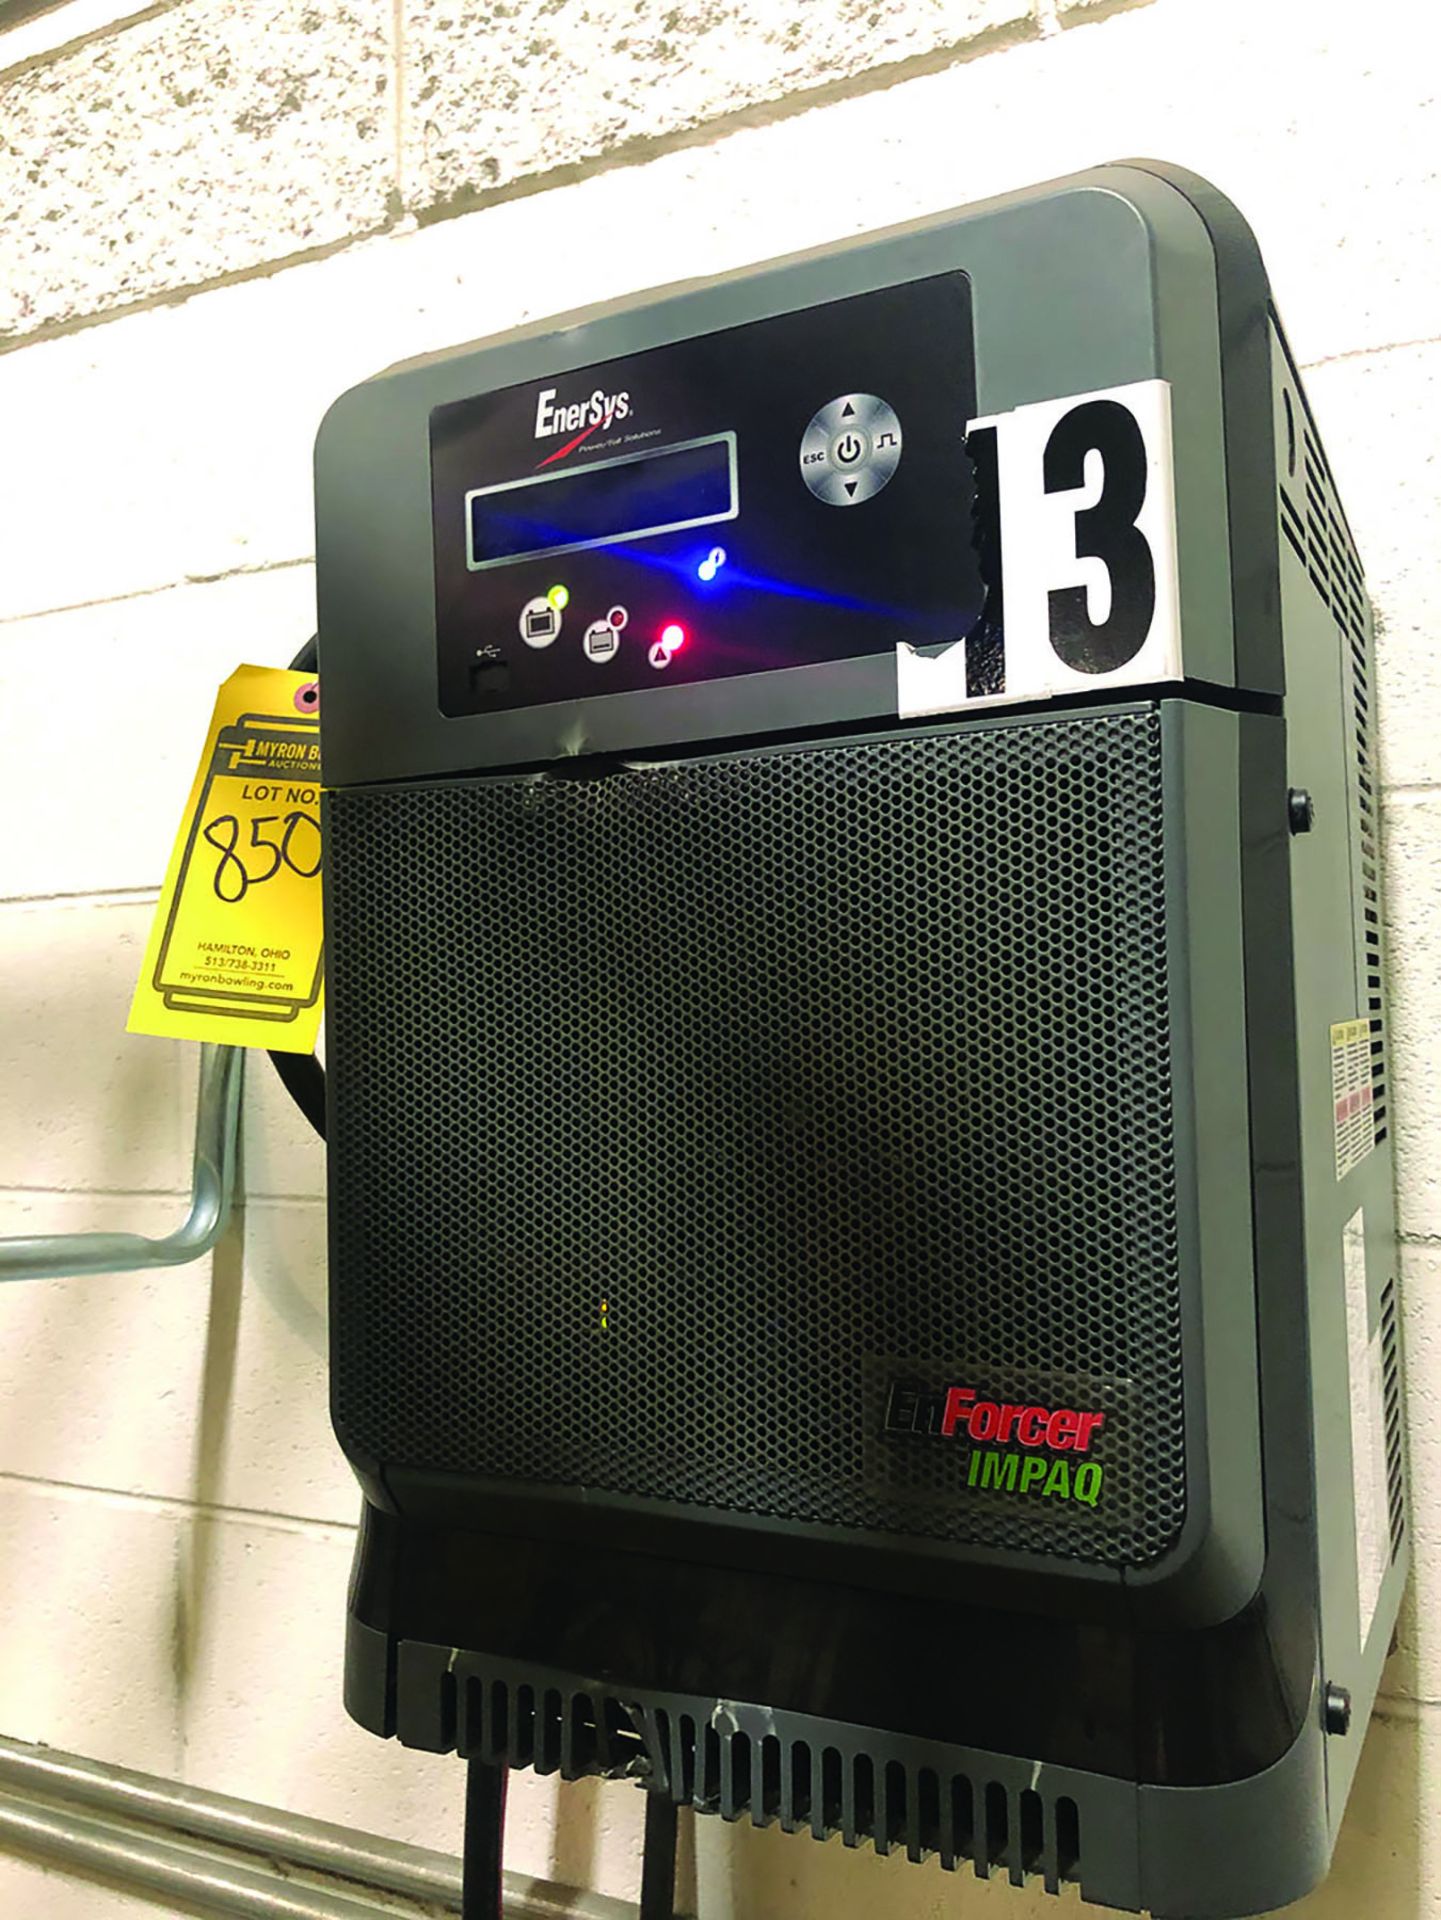 ENERSYS ENFORCER IMPAQ BATTERY CHARGER, MODEL # E13IN4Y, S/N- NG214353, NO. OF CELLS 12/18/24, 3